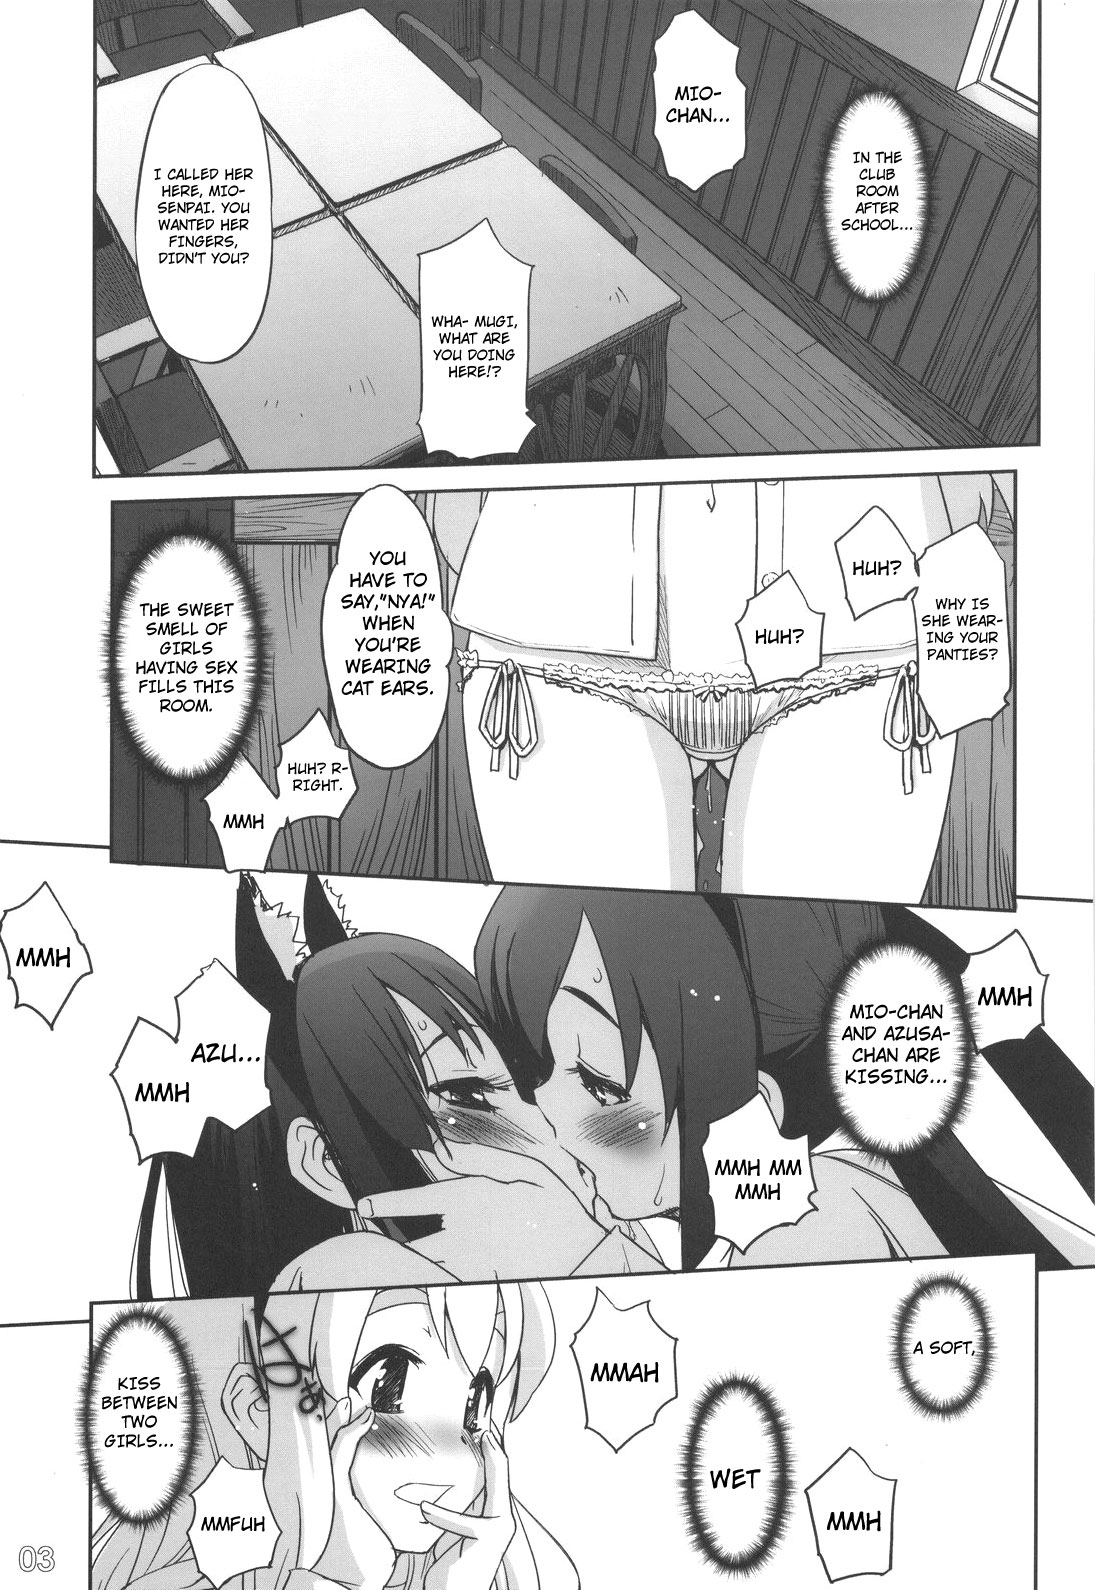 (C76) [G-Power! (Sasayuki)] Nekomimi to Toilet to Houkago no Bushitsu | Cat Ears And A Restroom And The Club Room After School (K-ON) [English] [Nicchiscans-4Dawgz] 1